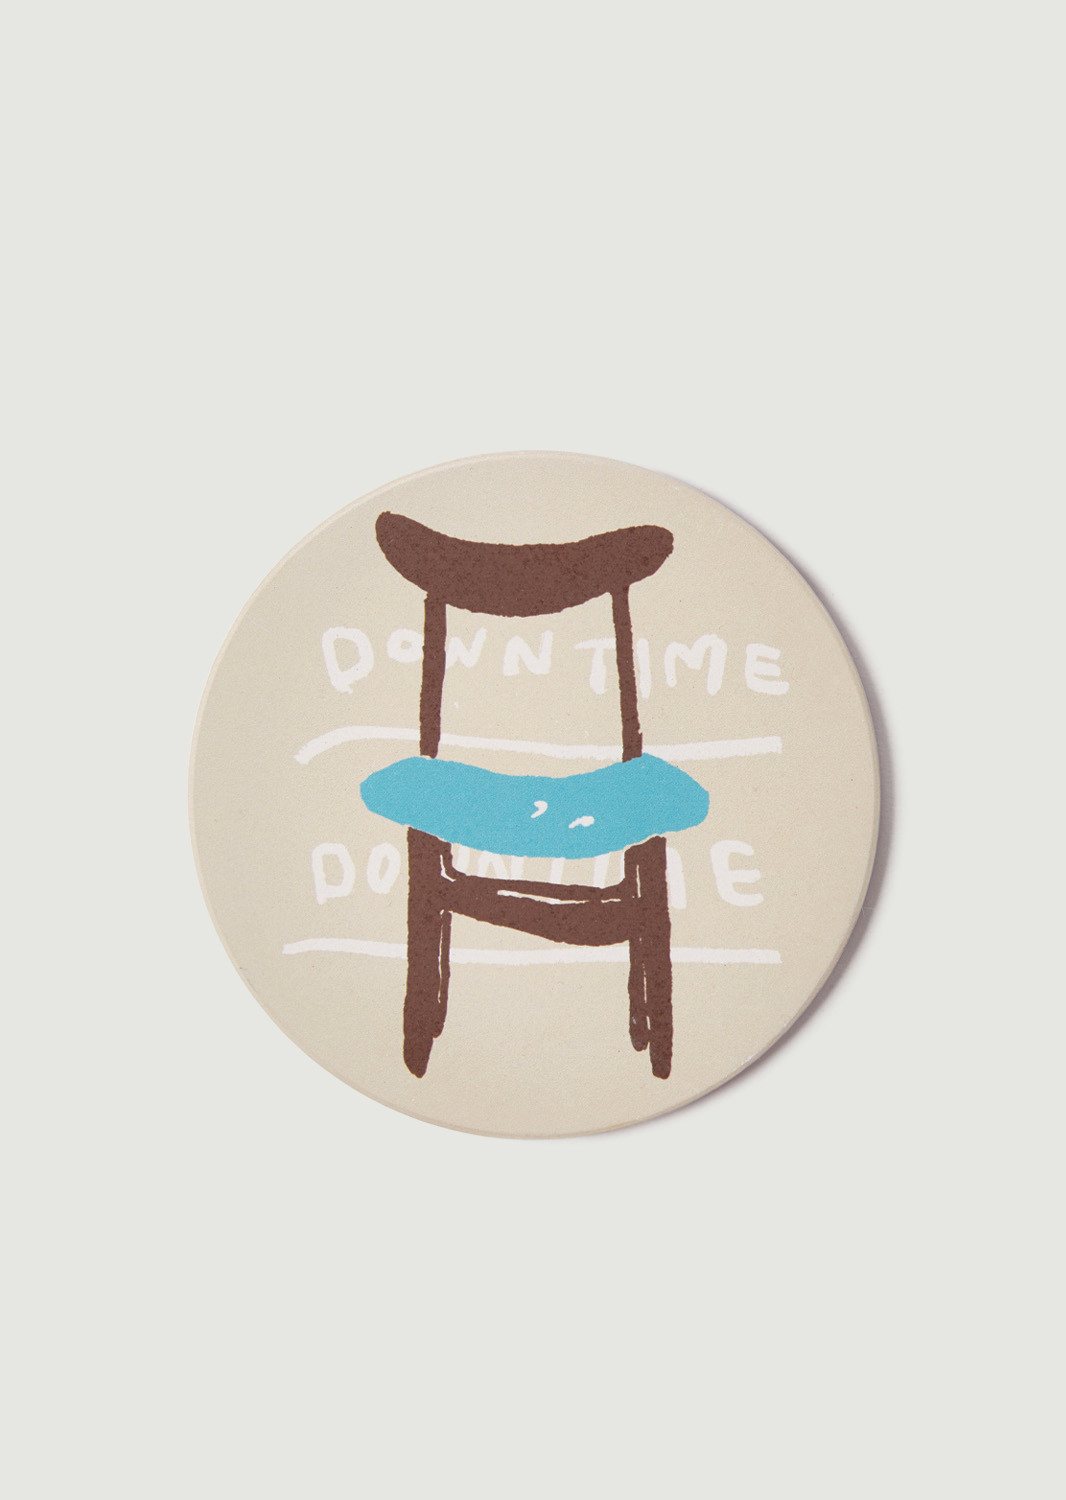 ‘DOWNTIME’ Coaster